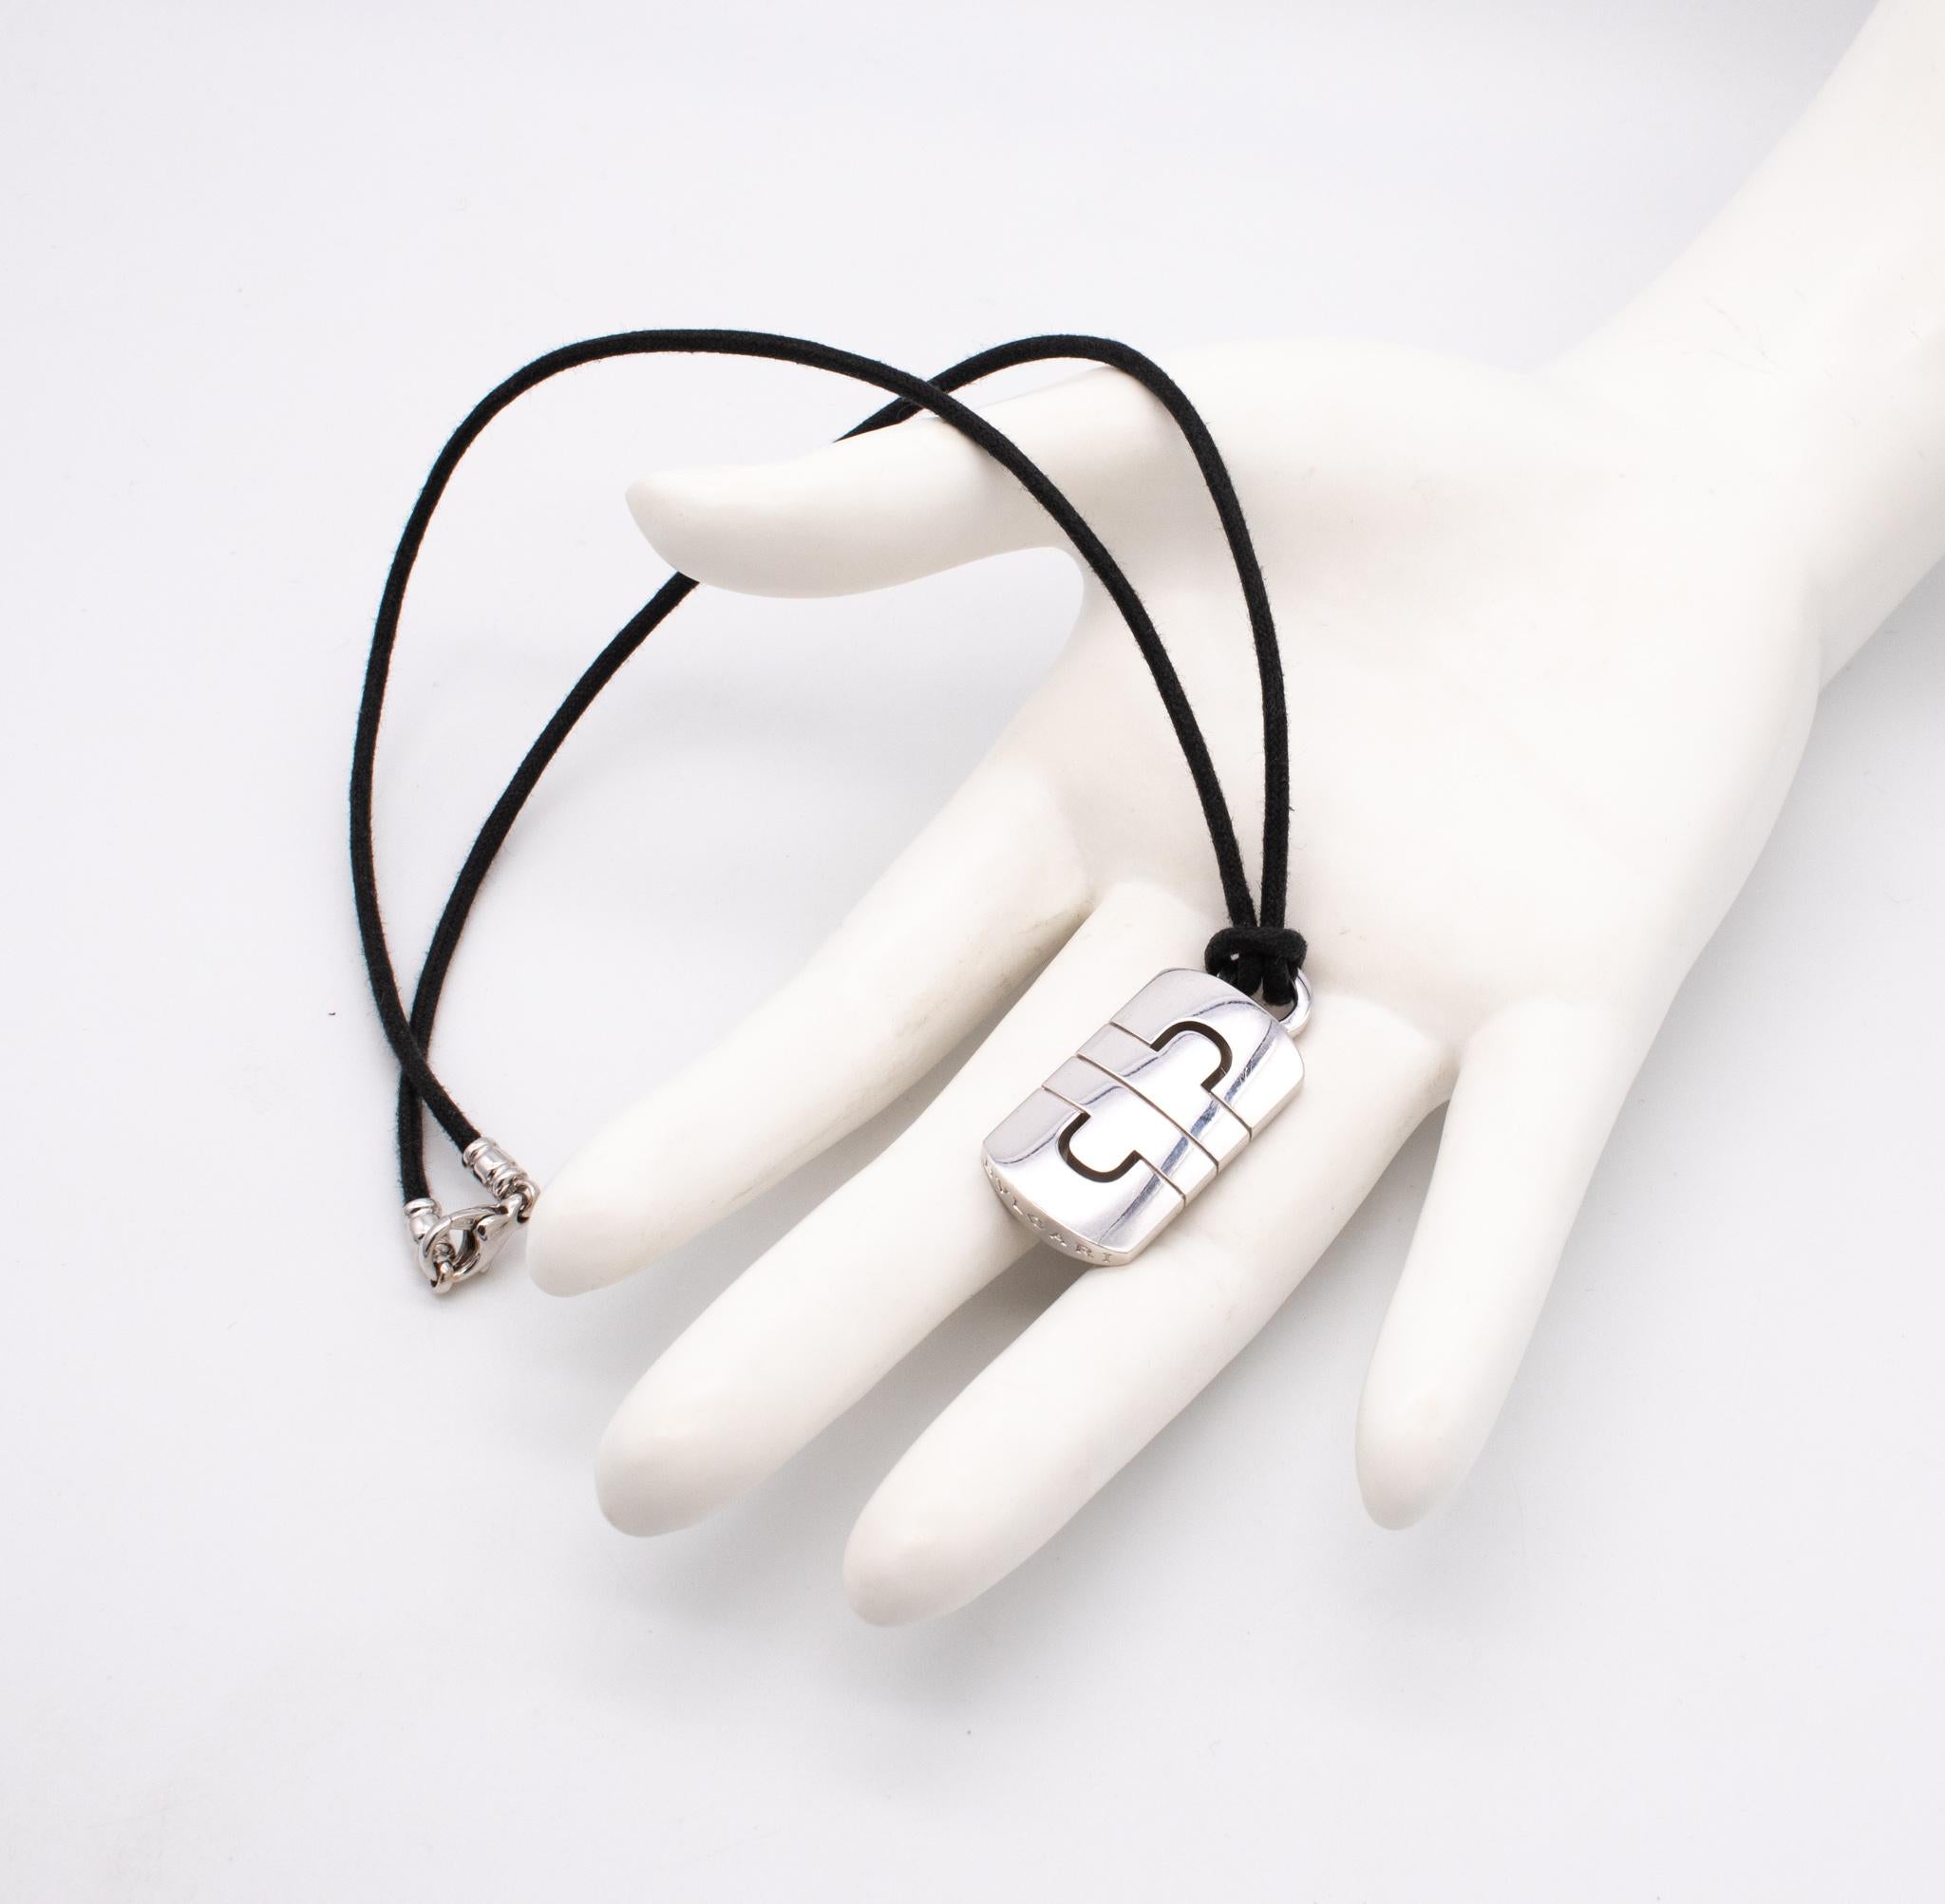 A Parentesi necklace designed by Bvlgari

 Modern unisex piece crafted in solid 18 karats white gold and finished, with high polished surfaces. Suited with a leathered cord and a white gold lobster locks.

From the Bvlgari, iconic Parentesi